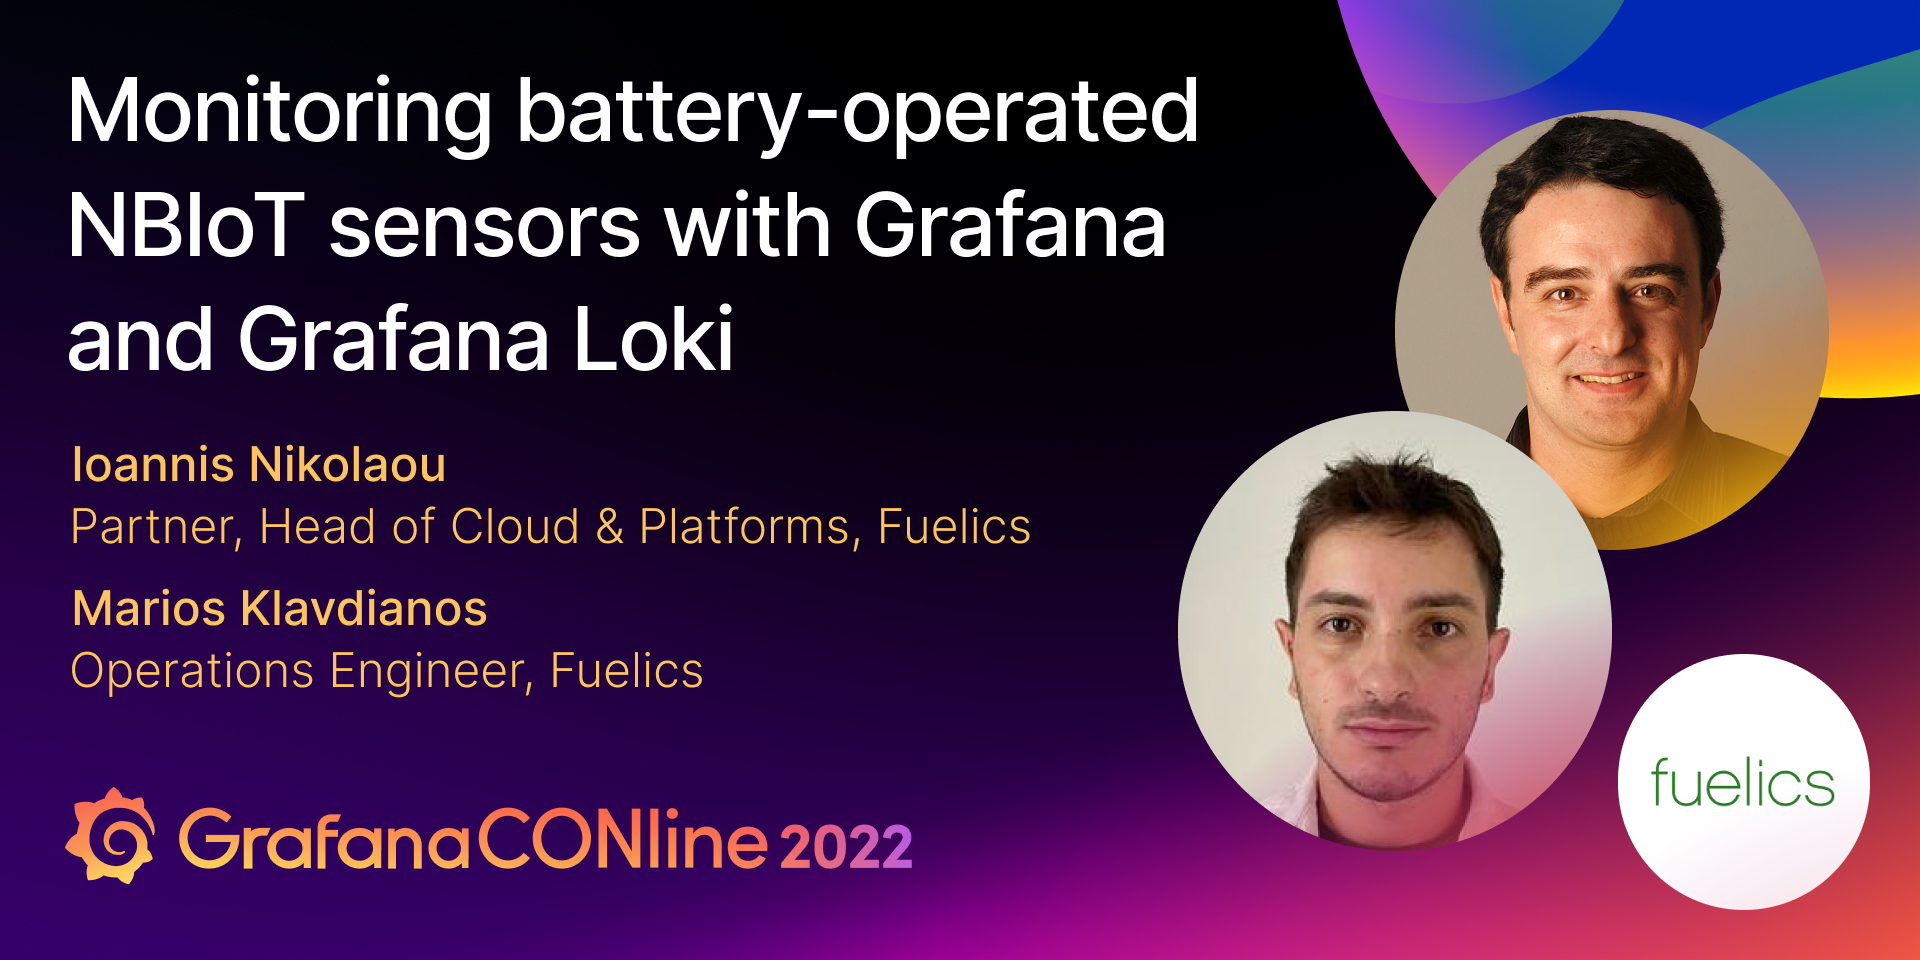 Information about the GrafanaCONline 2022 talk featuring Fuelics.